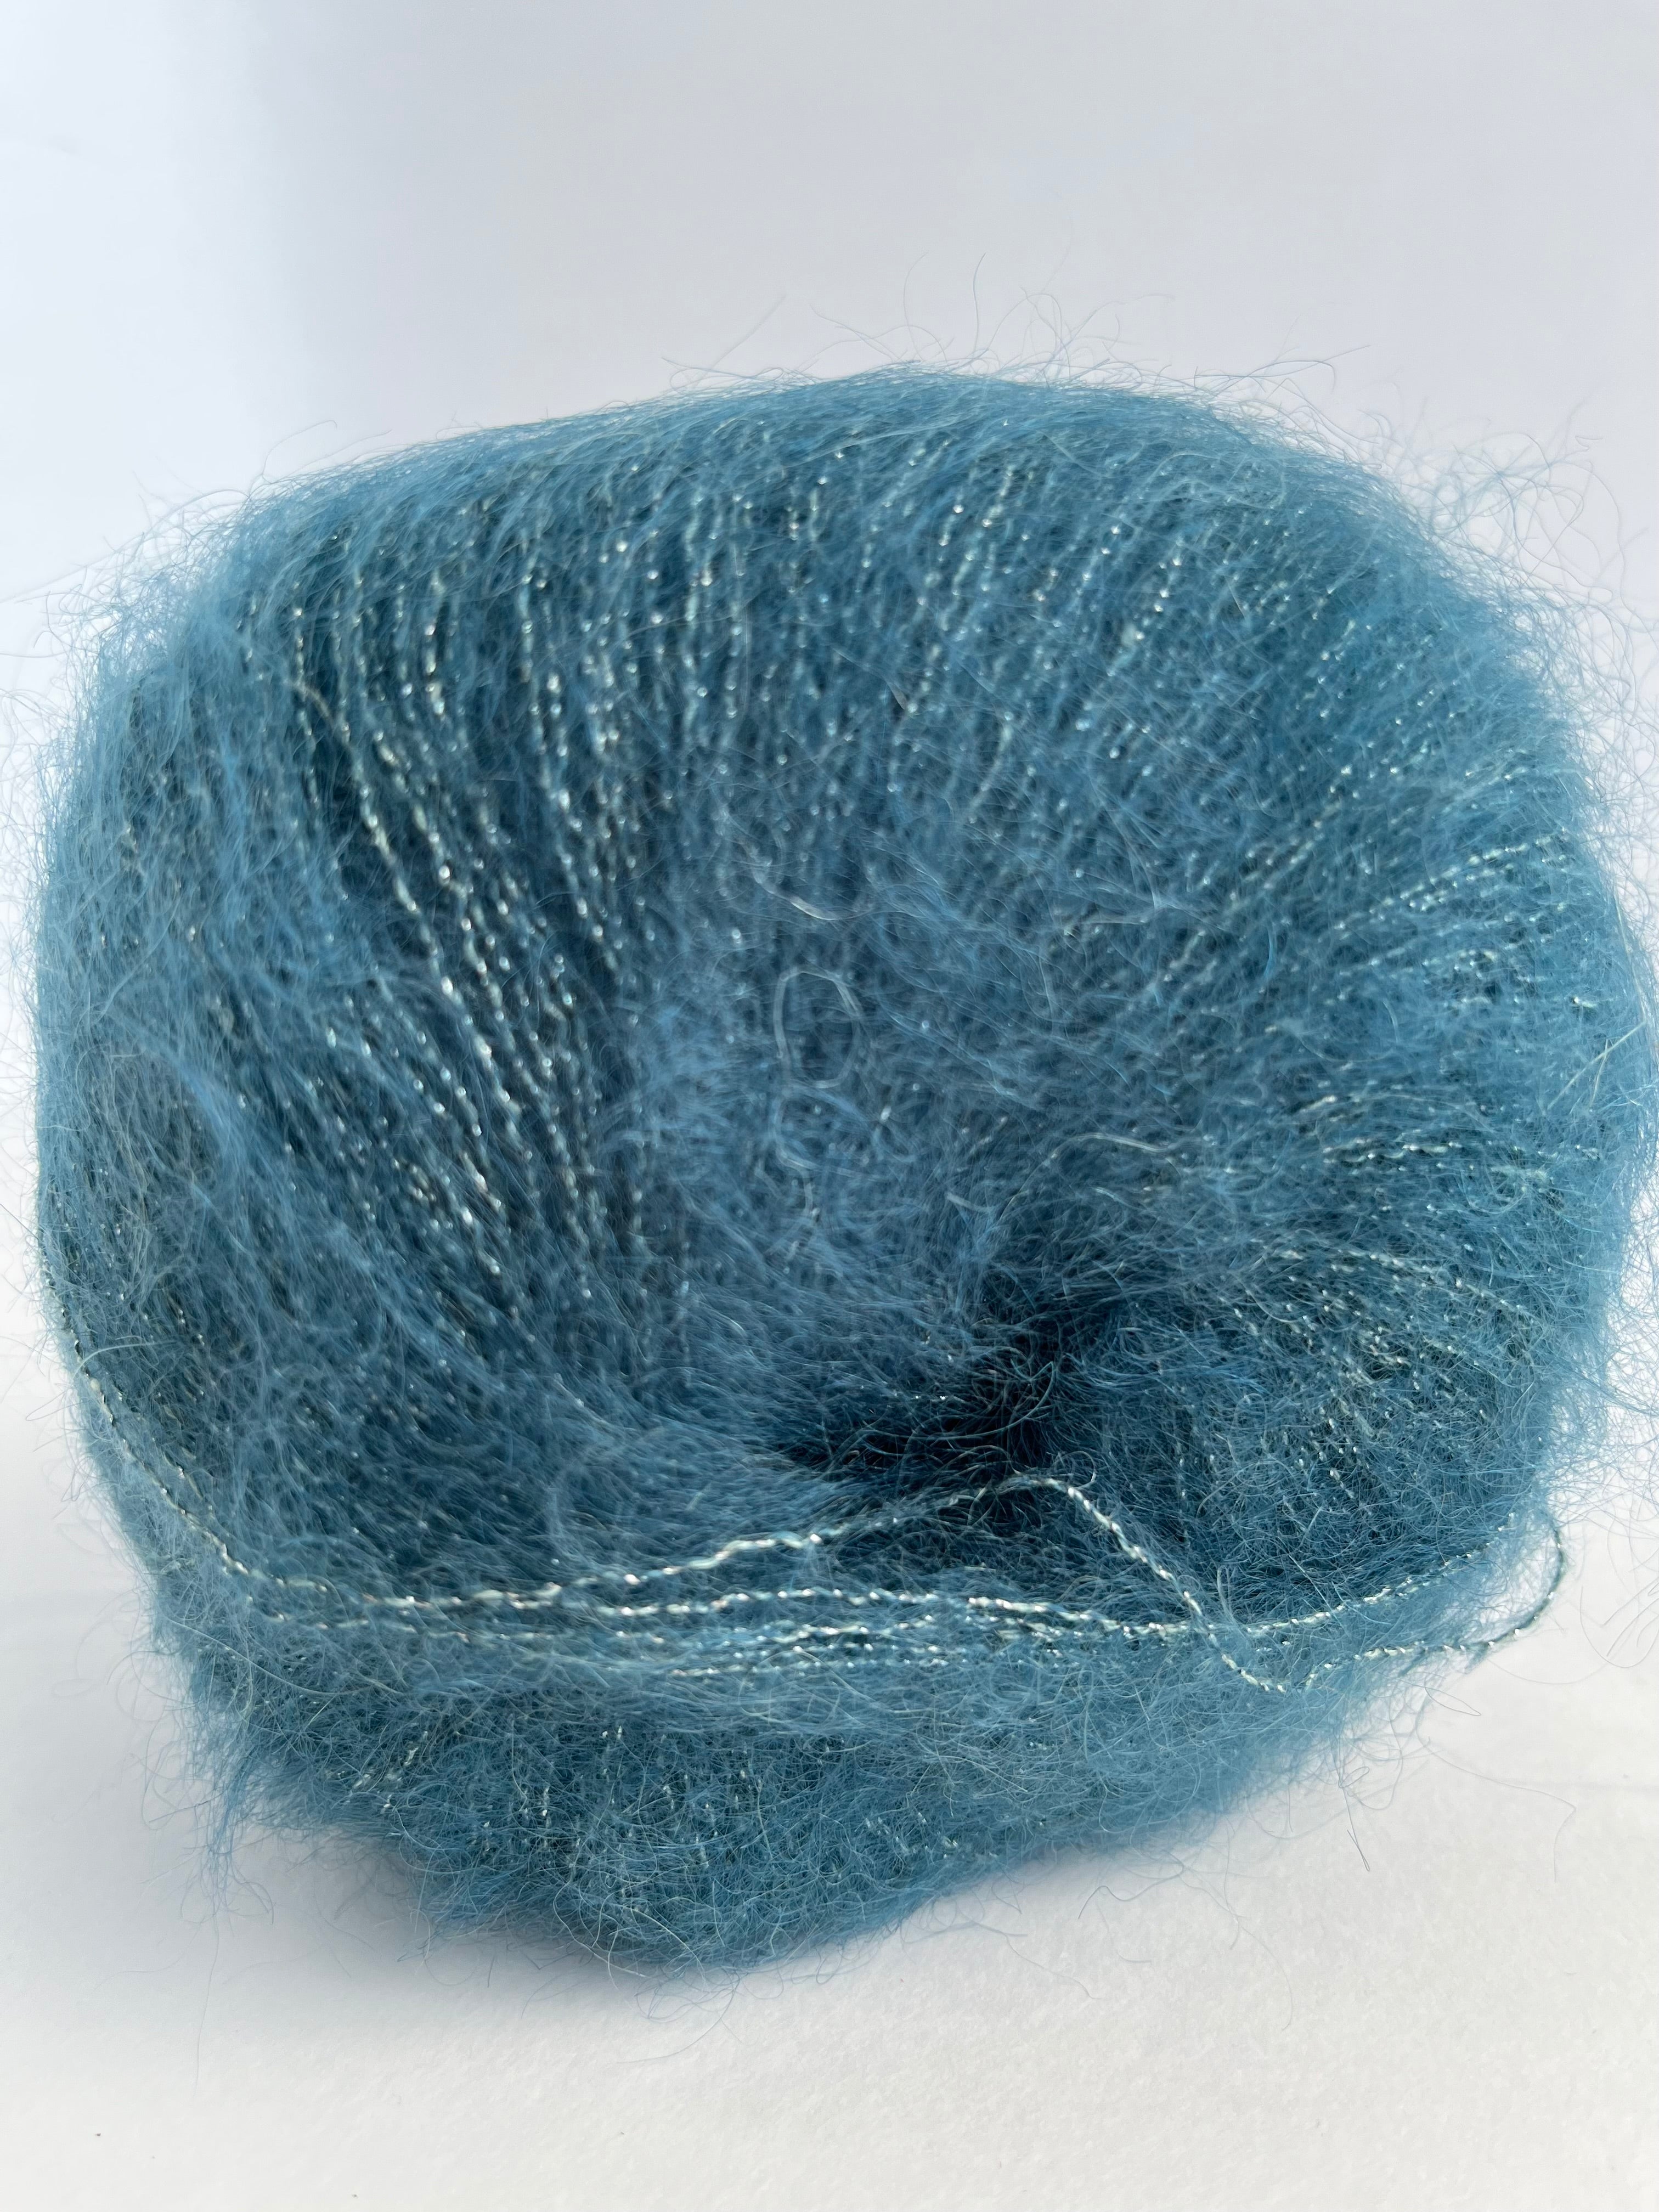 Teal 14527 - Silk Mohair Lux from Lana Gatto